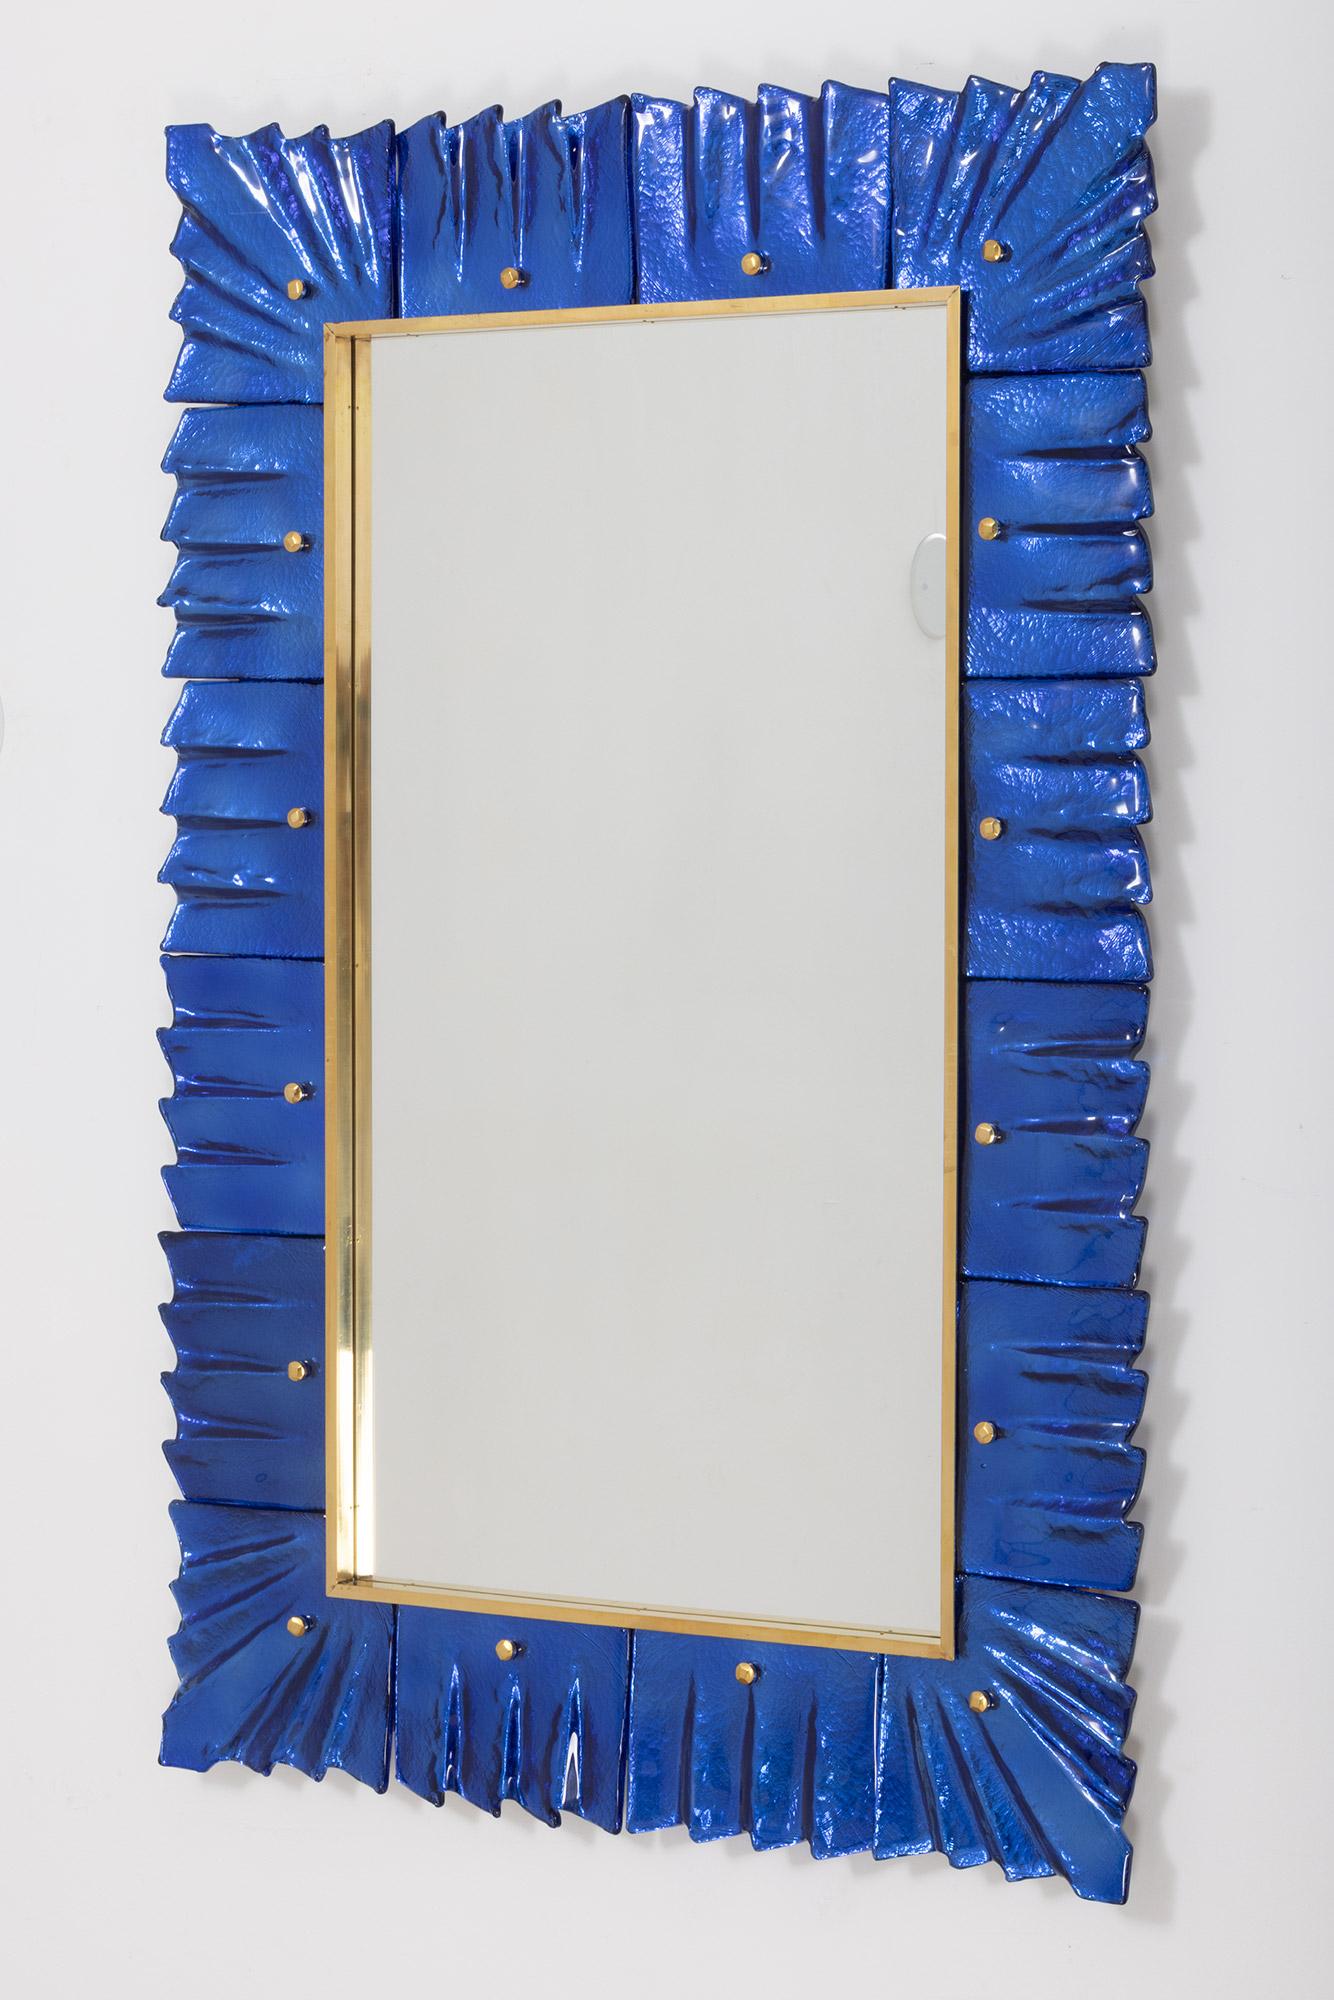 Contemporary Murano cobalt blue glass framed mirror, in stock
Mirror plate surrounded with undulating glass tiles in cobalt blue color held by brass cabochons. 
Handcrafted by a team of artisans in Venice, Italy. 
Can be easily hung vertically or